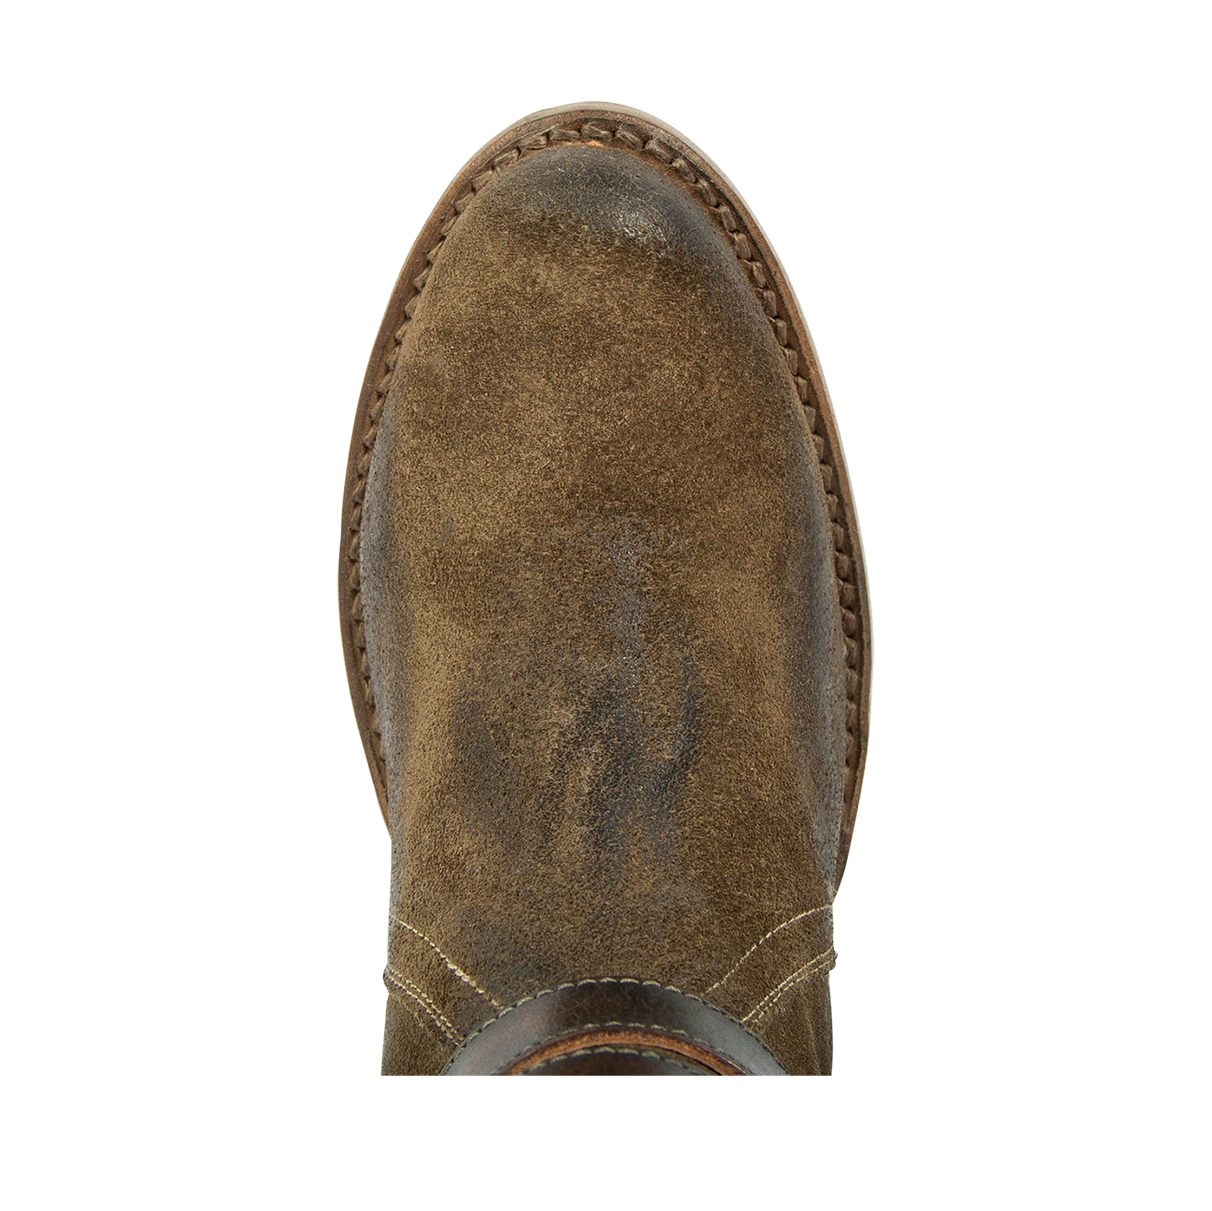 Top view showing almond shoe toe on FREEBIRD women's Shiloh olive suede leather ankle bootie